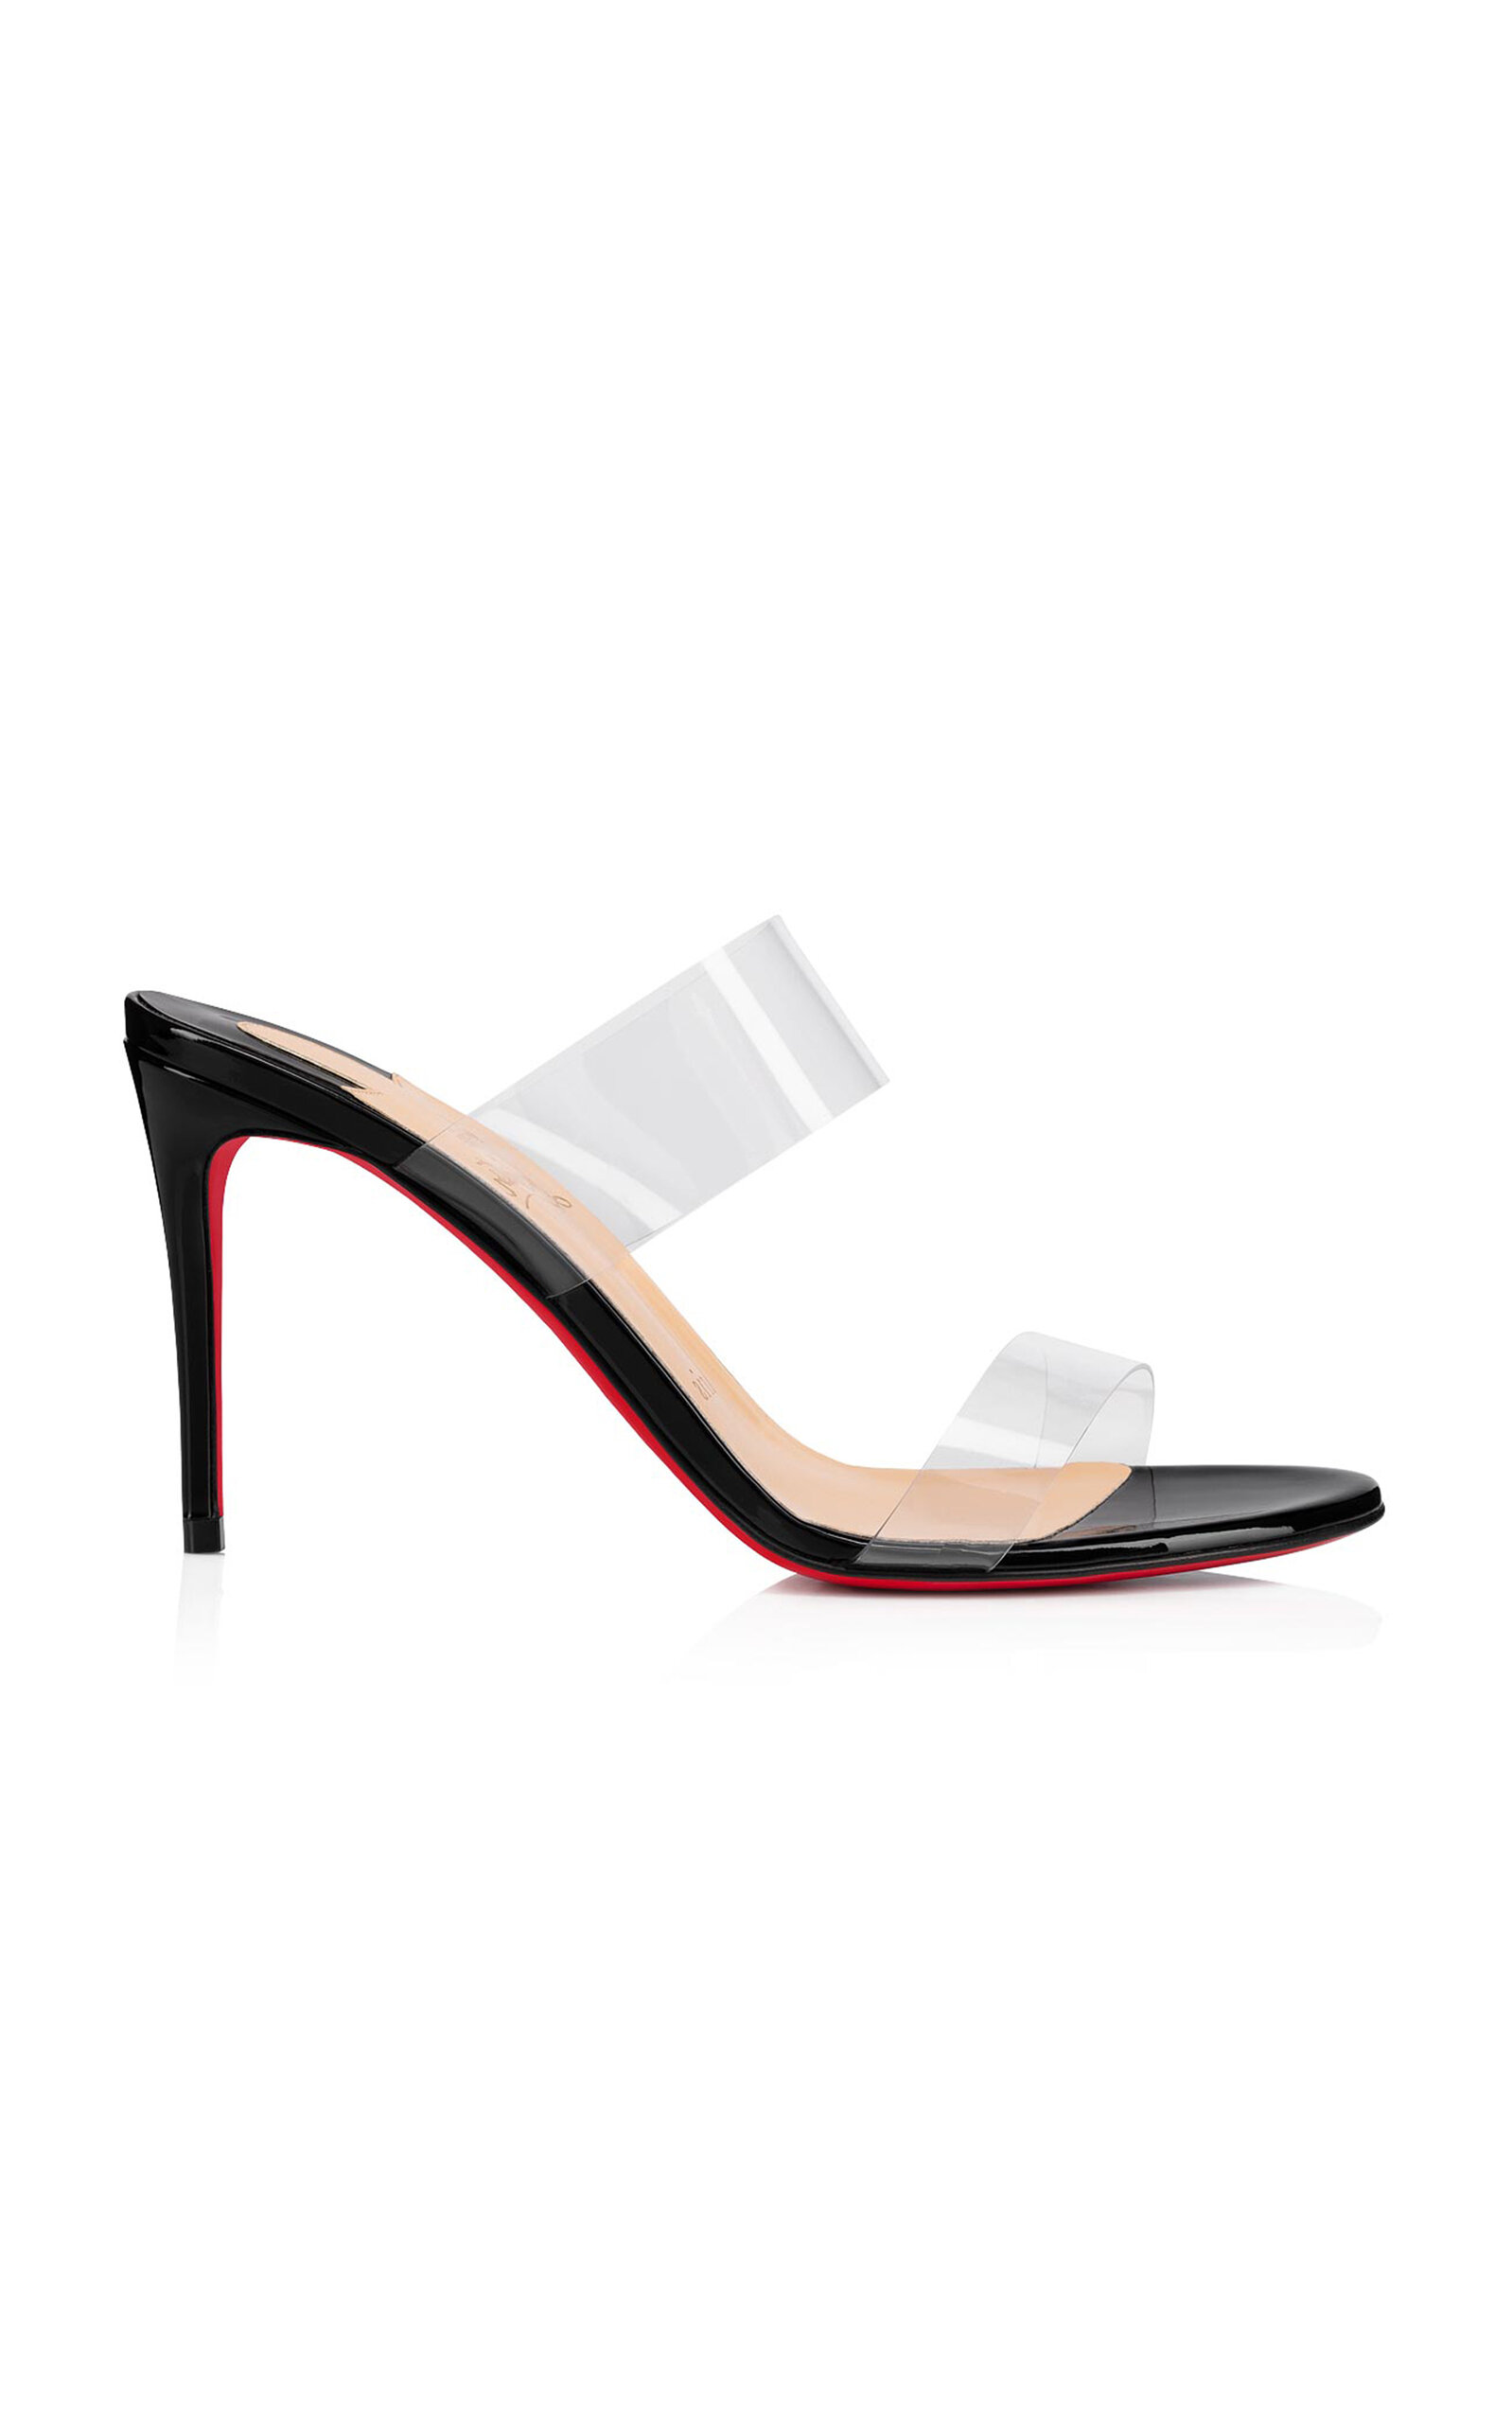 Shop Christian Louboutin Just Nothing 85mm Patent Pvc Sandals In Black